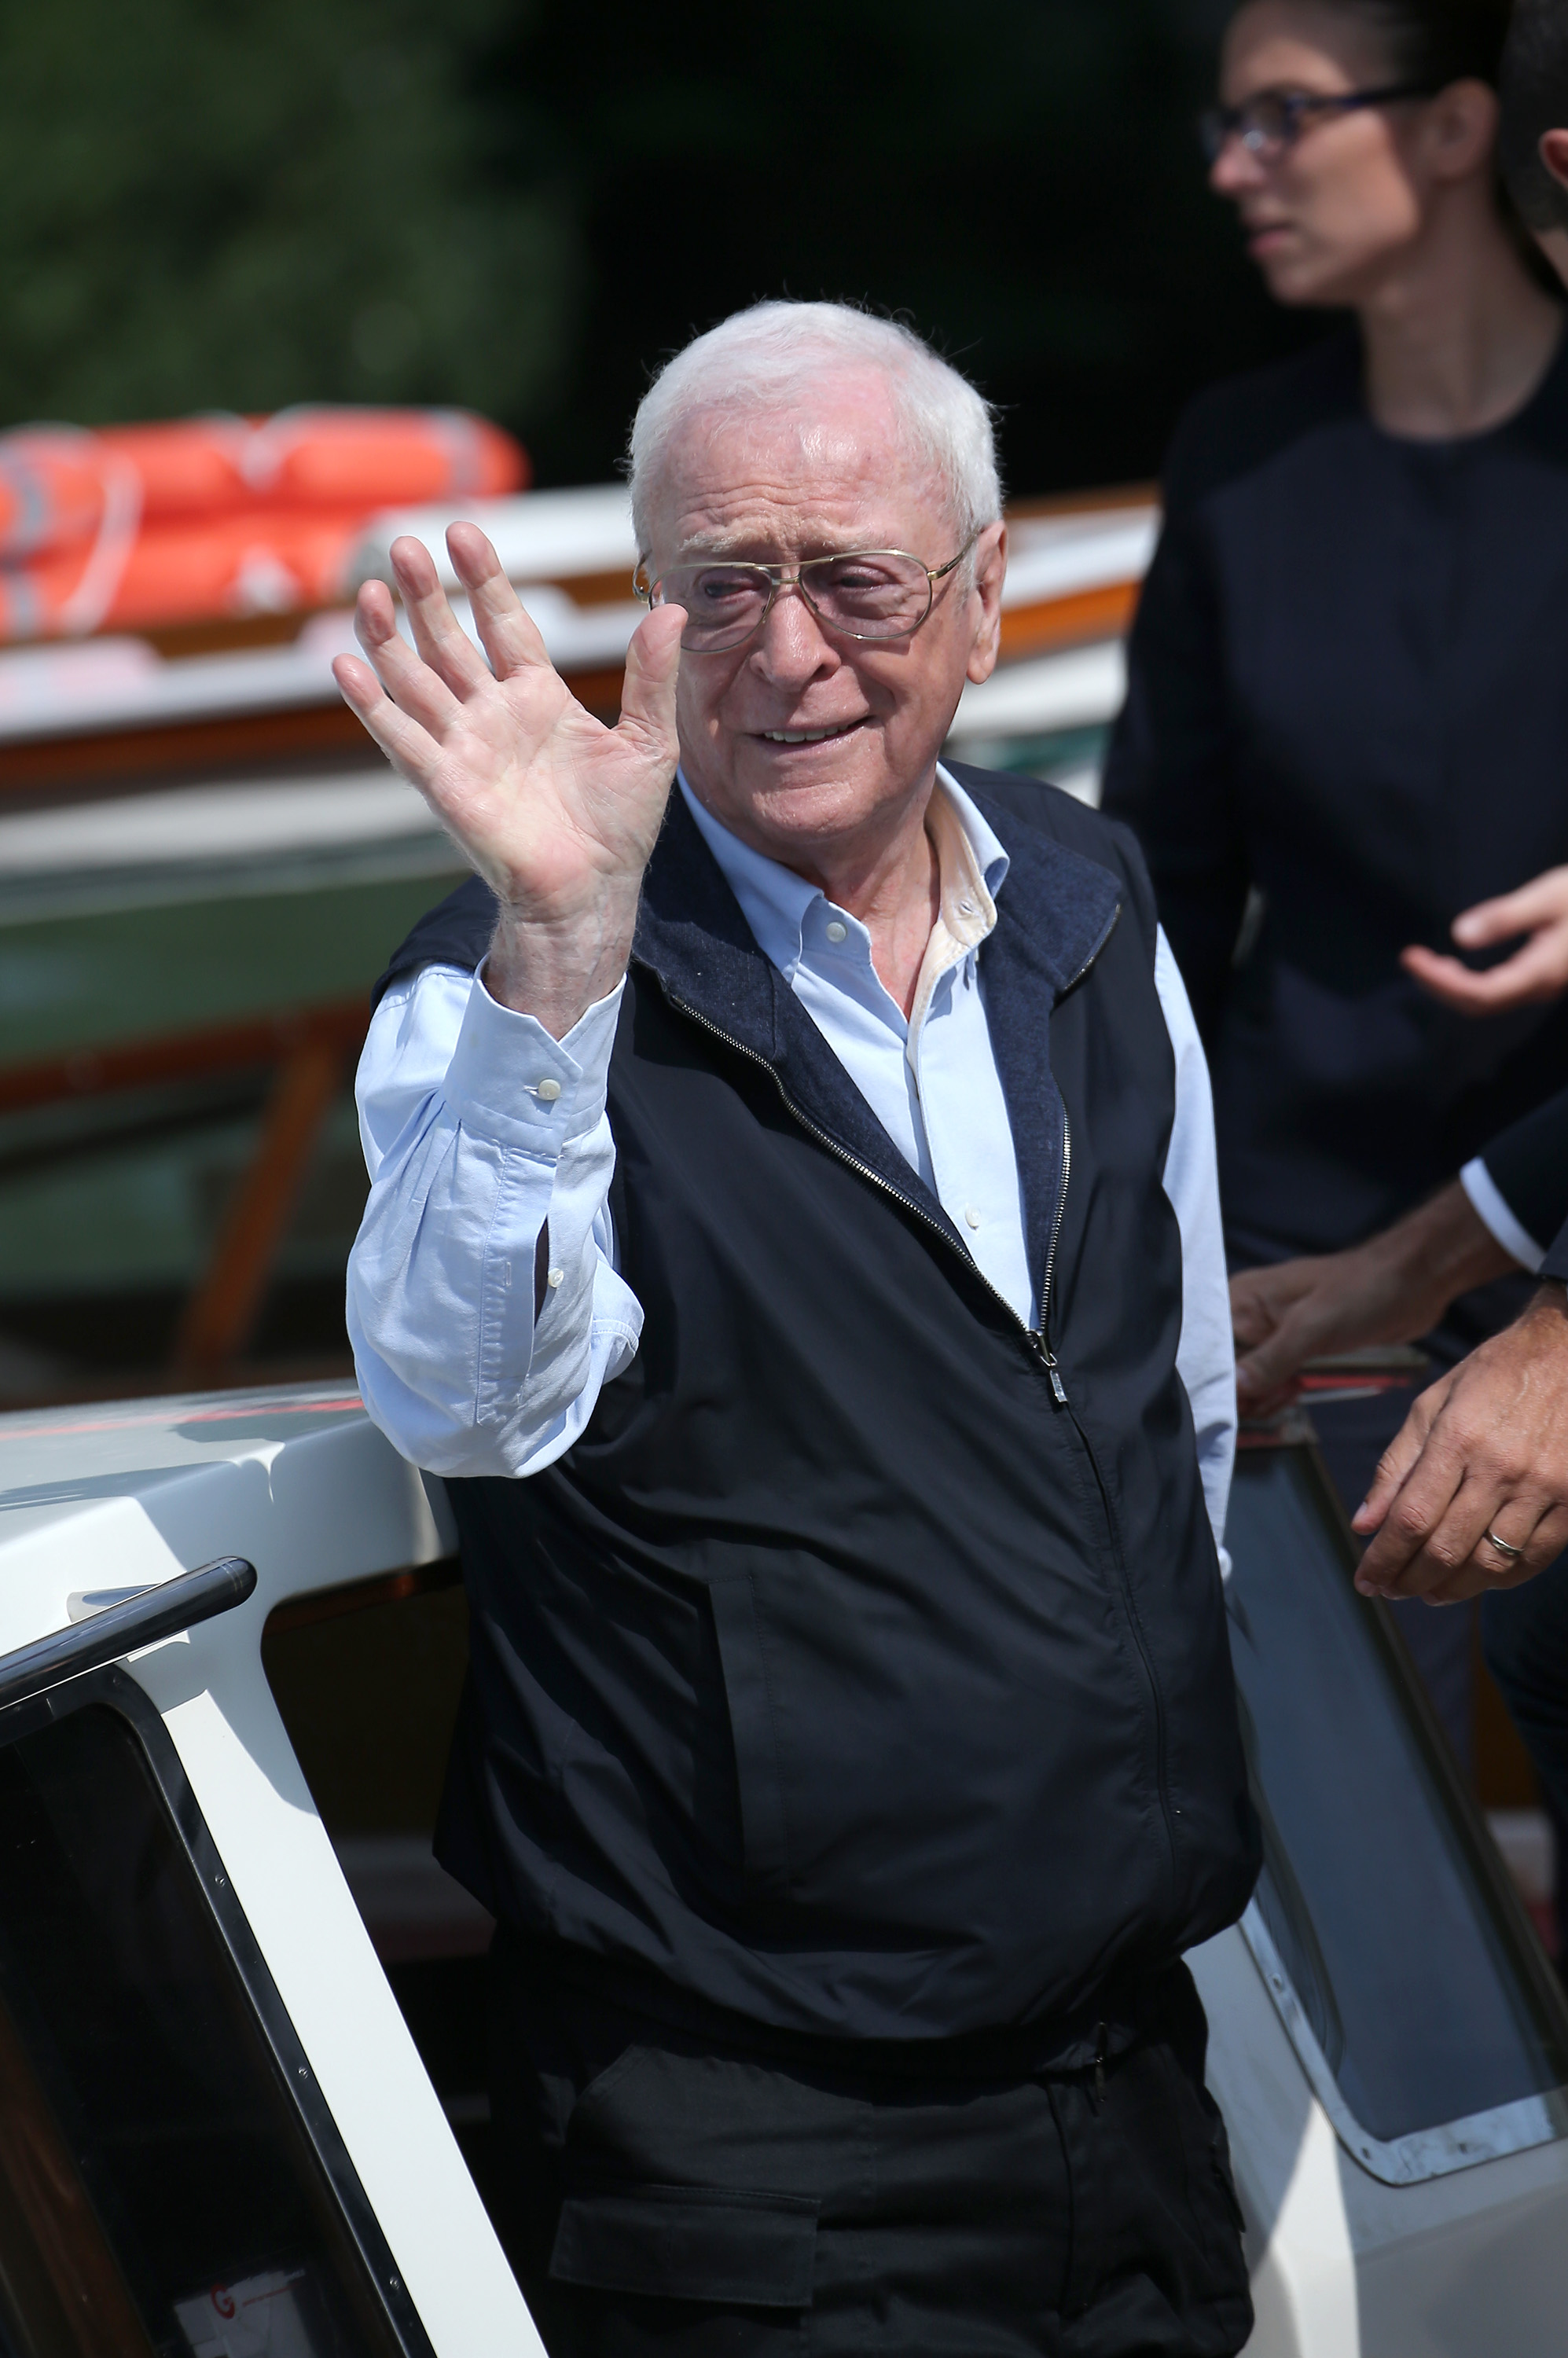 Michael Caine arrives at the Hotel Excelsior on September 6, 2017 in Venice, Italy | Source: Getty Images